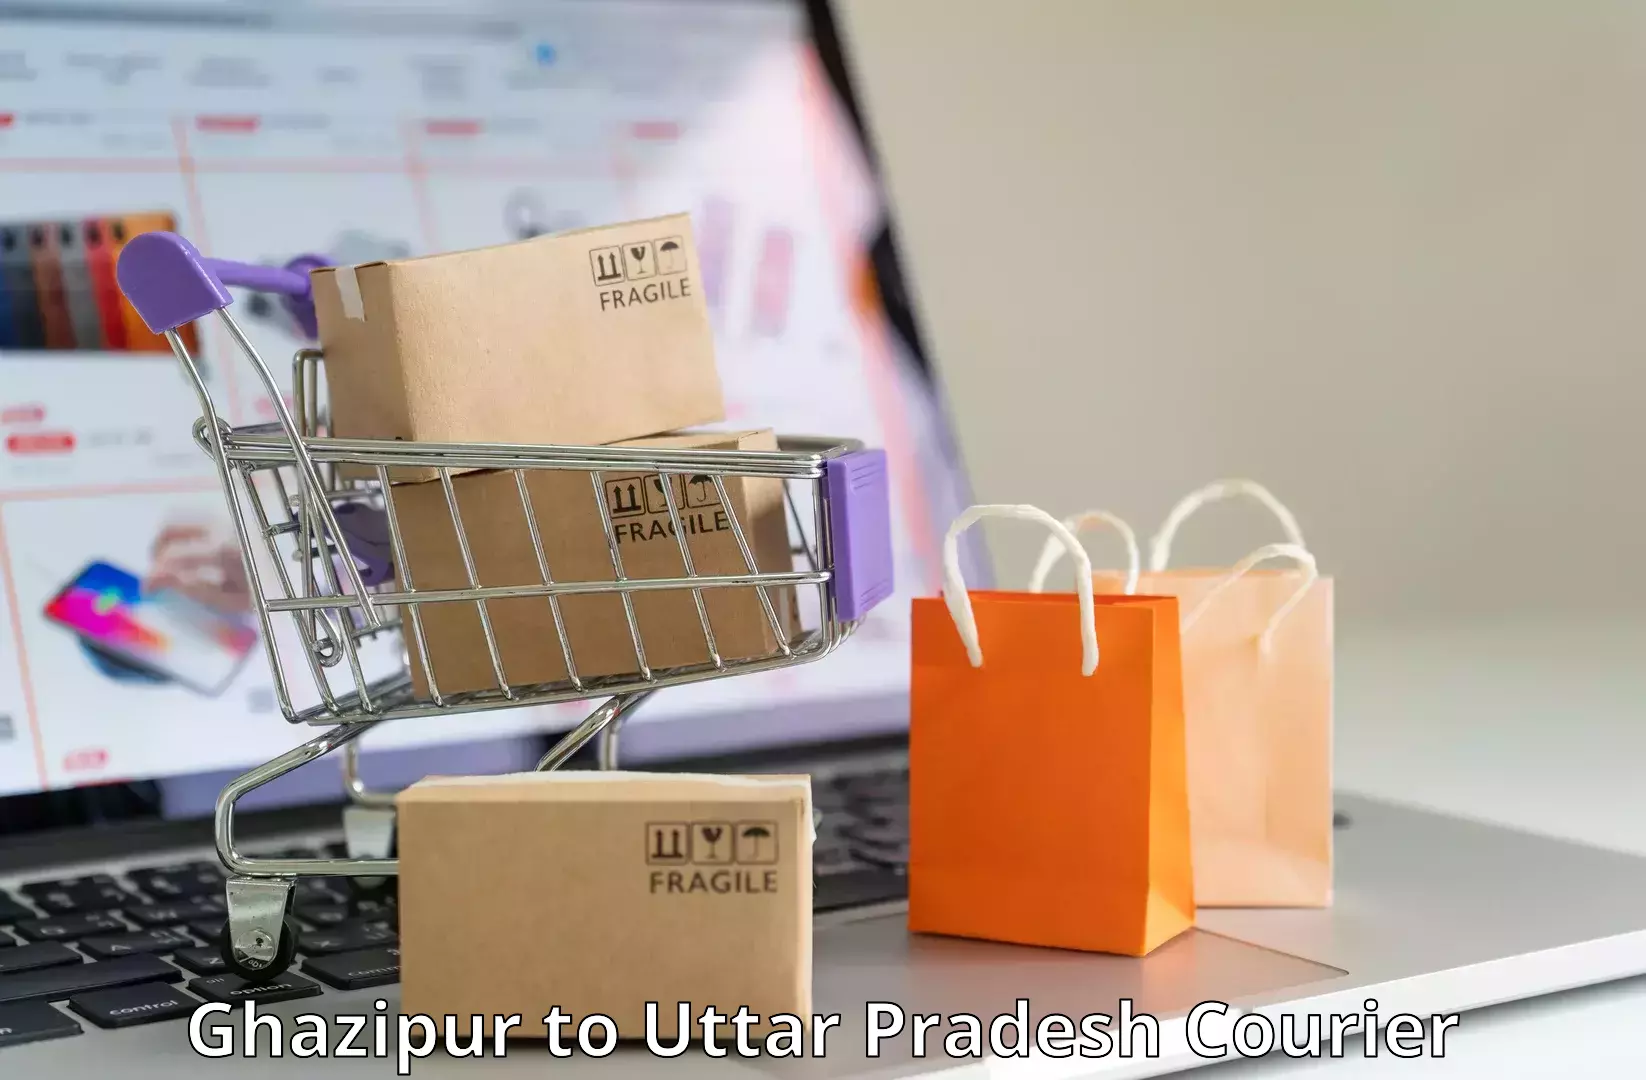 Courier services Ghazipur to Kanpur